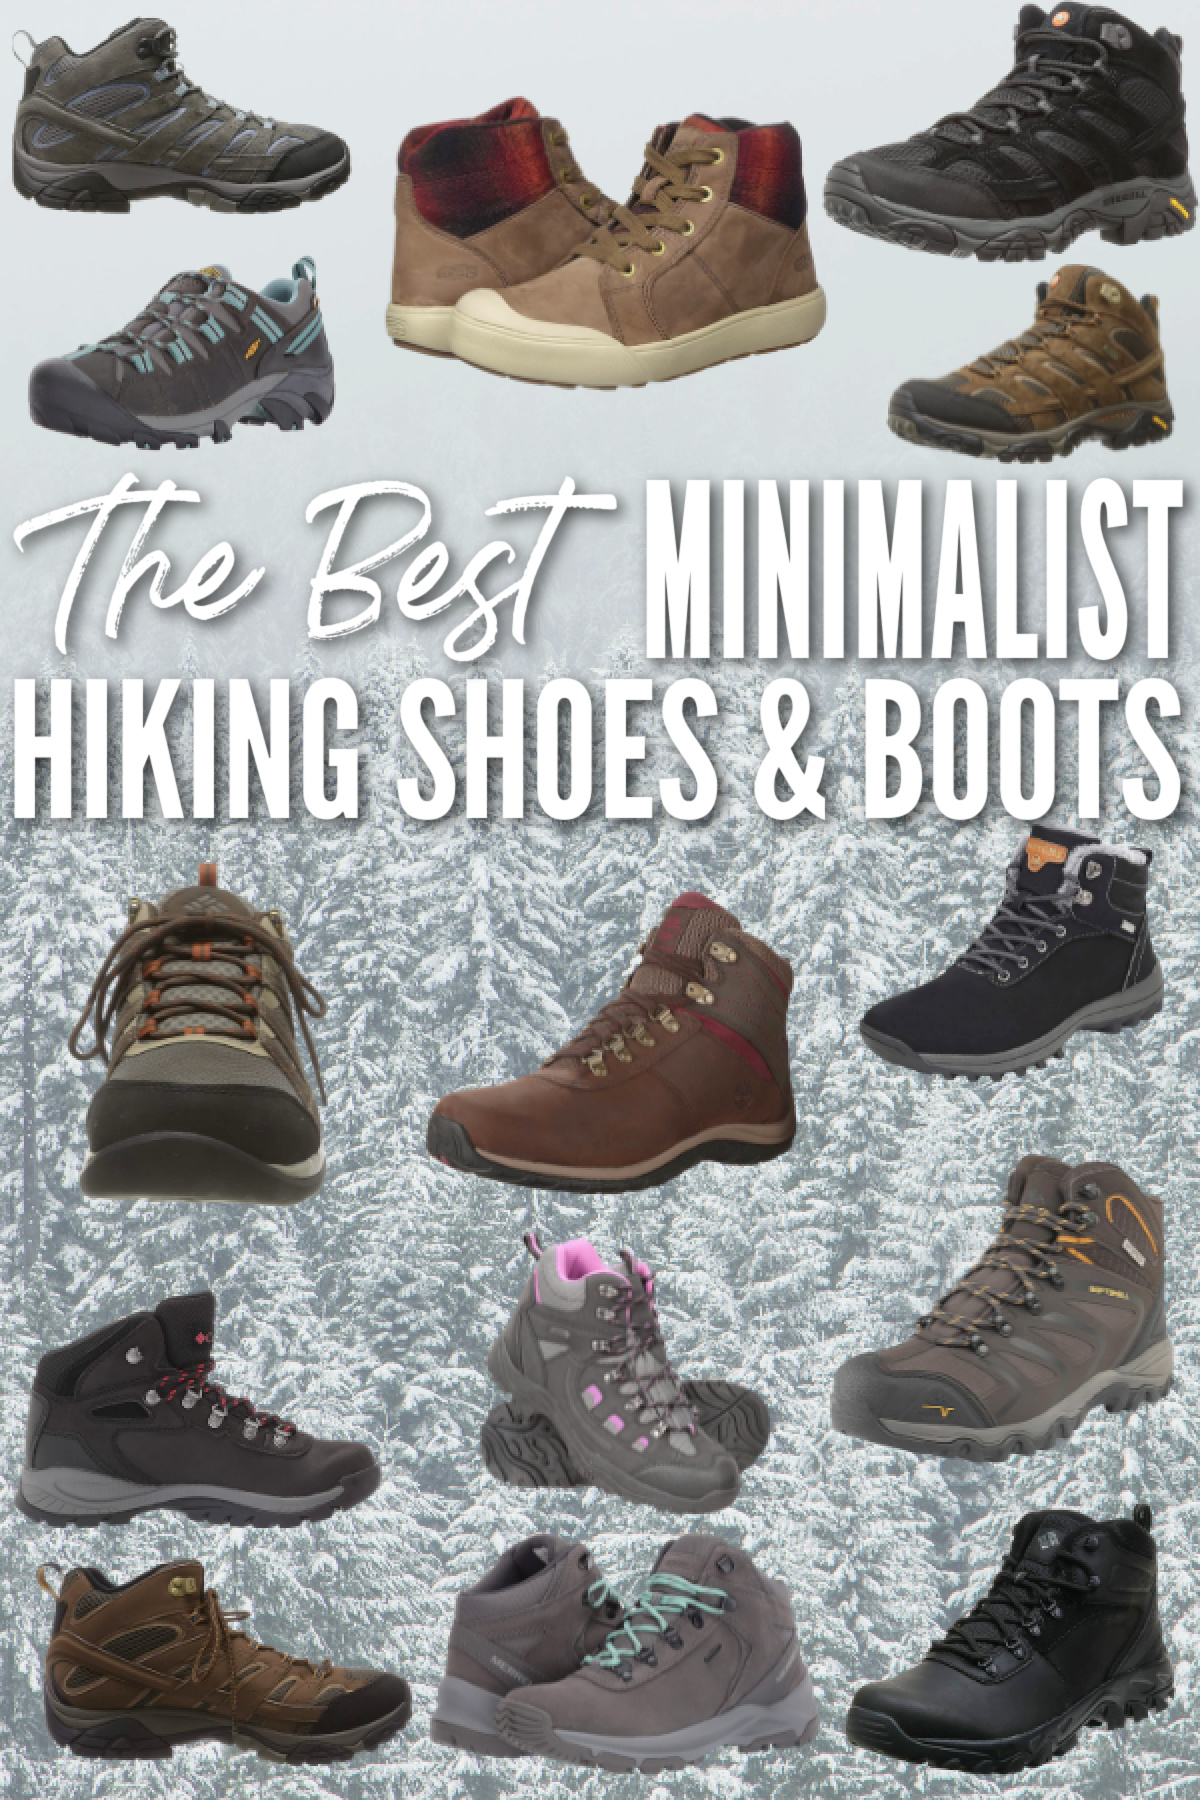 Here are the best minimalist hiking shoes and boots for men and women. These lightweight, comfortable boots that we have handpicked for you!